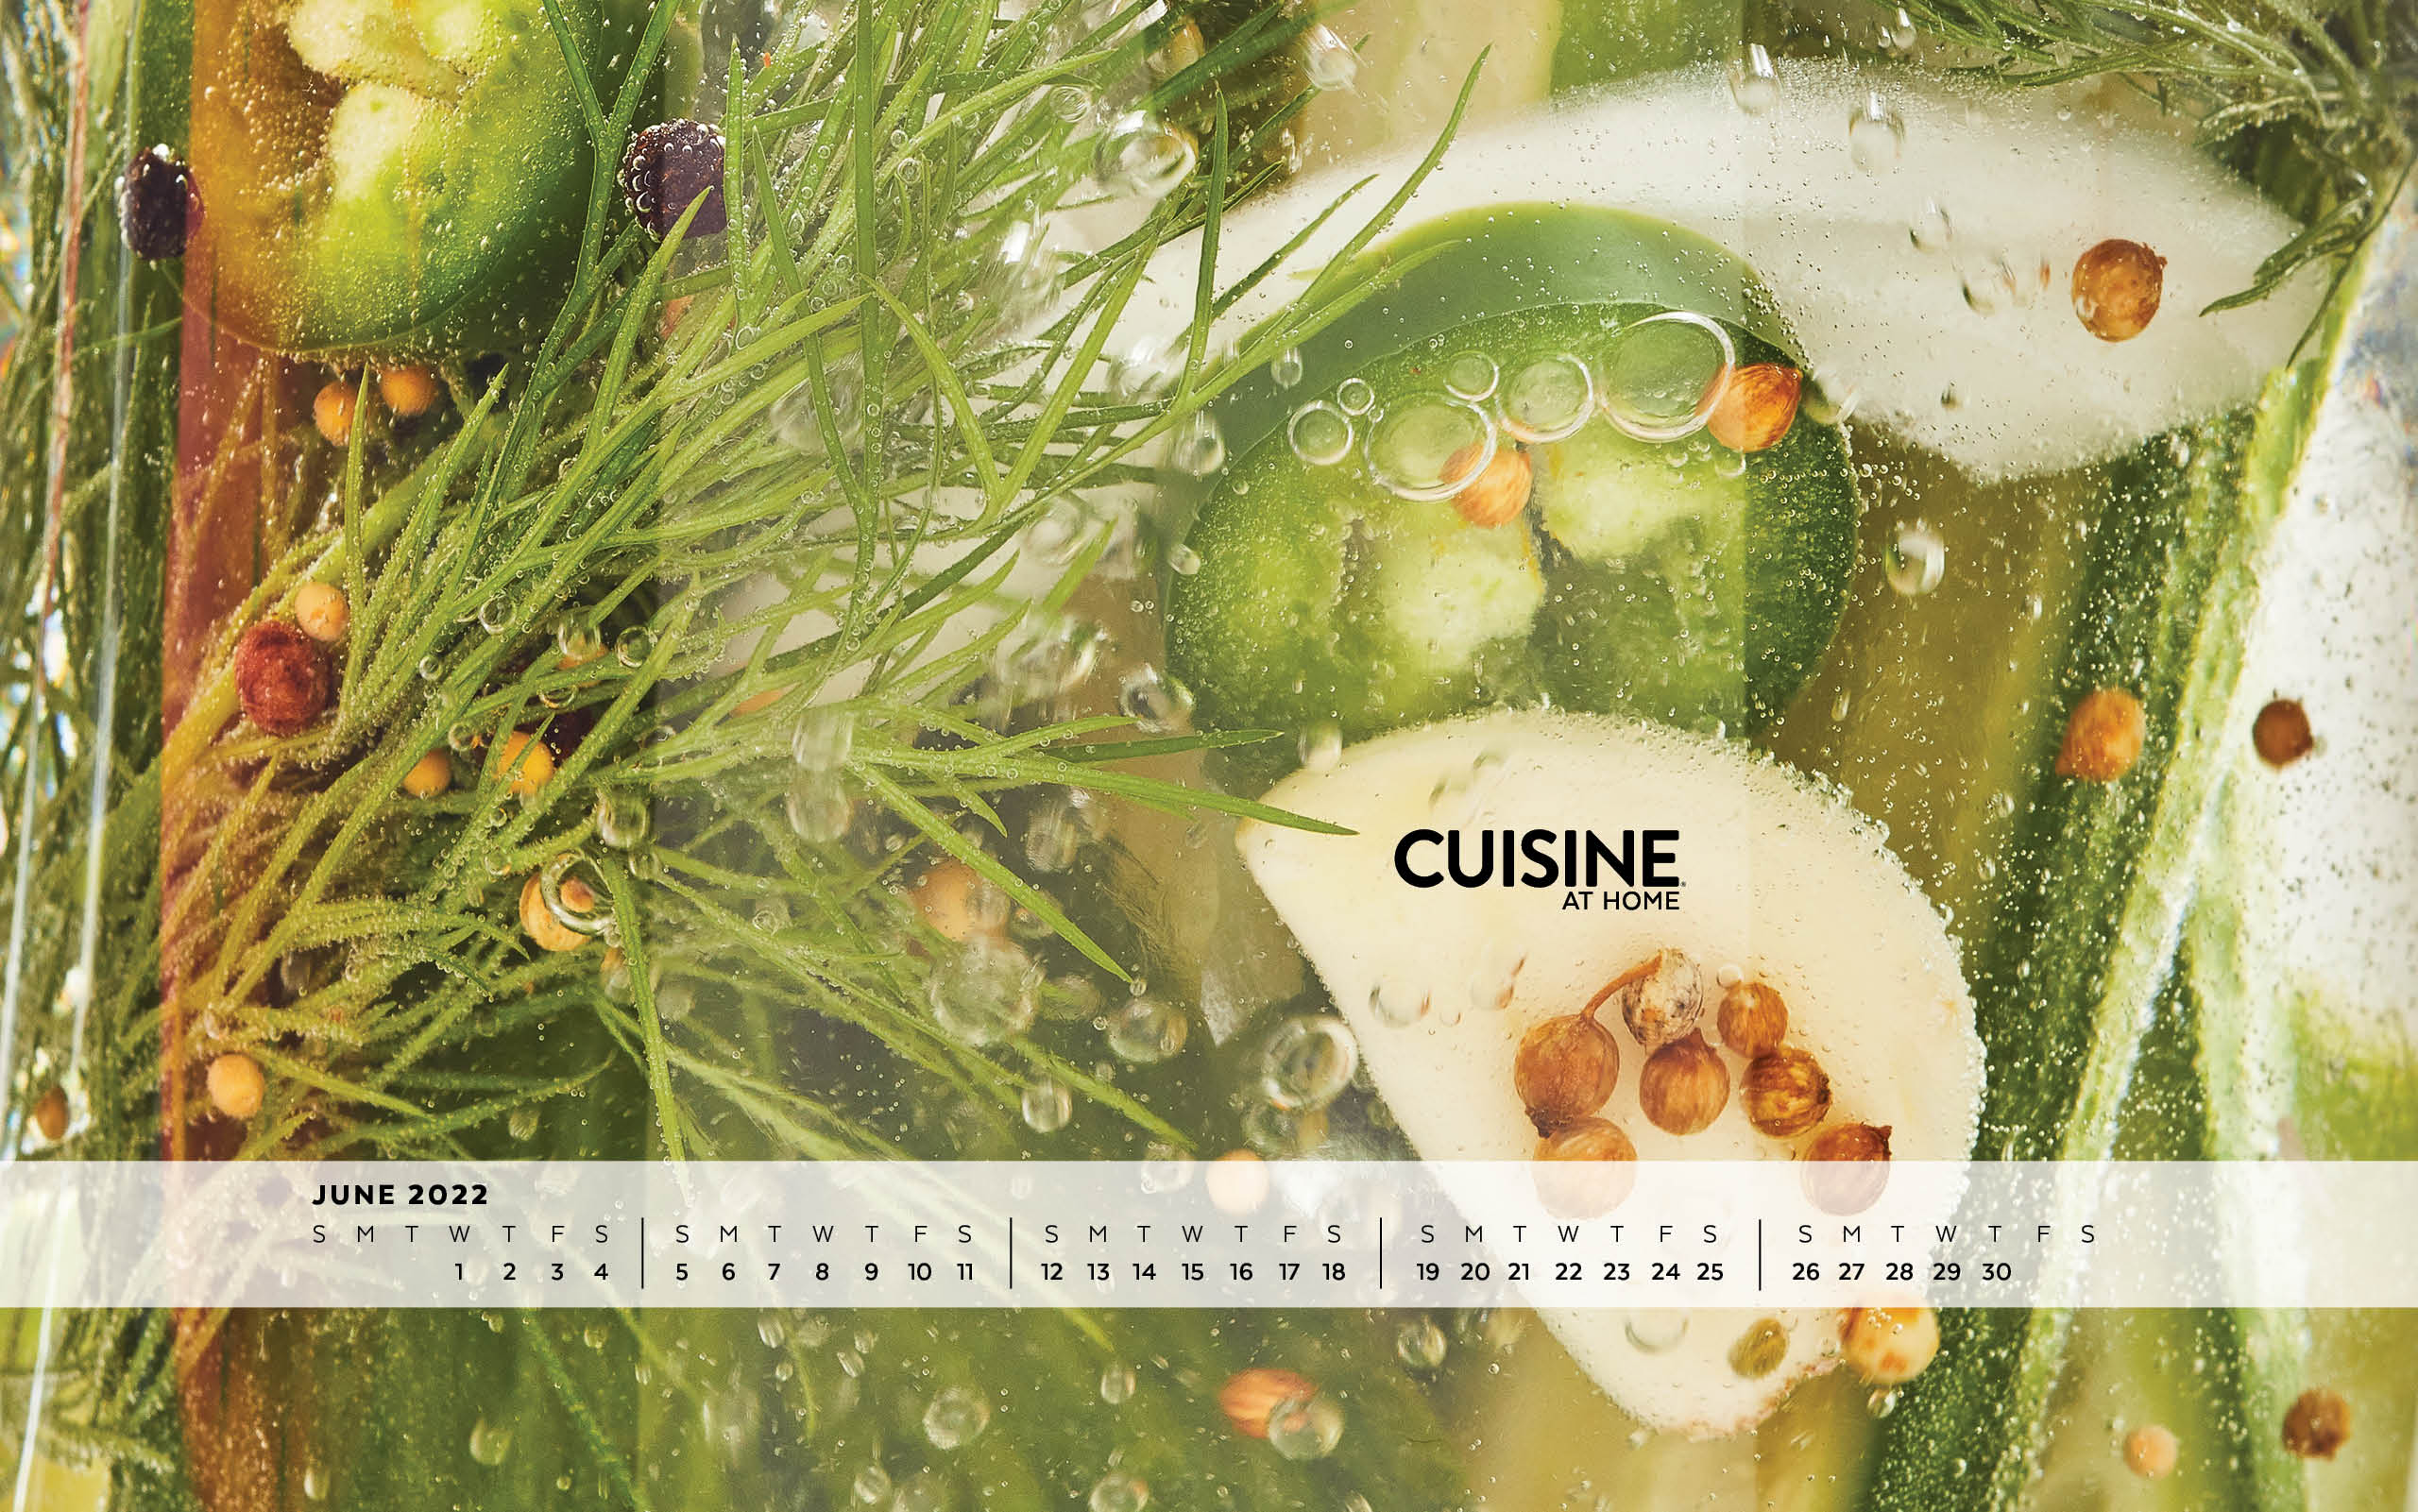 Free Desktop Wallpaper with calendar Windows Mac - June 2022 - Cuisine at Home - Spring summer aesthetic food cooking green pickles dill jalapeno spicy mustard cucumber fresh